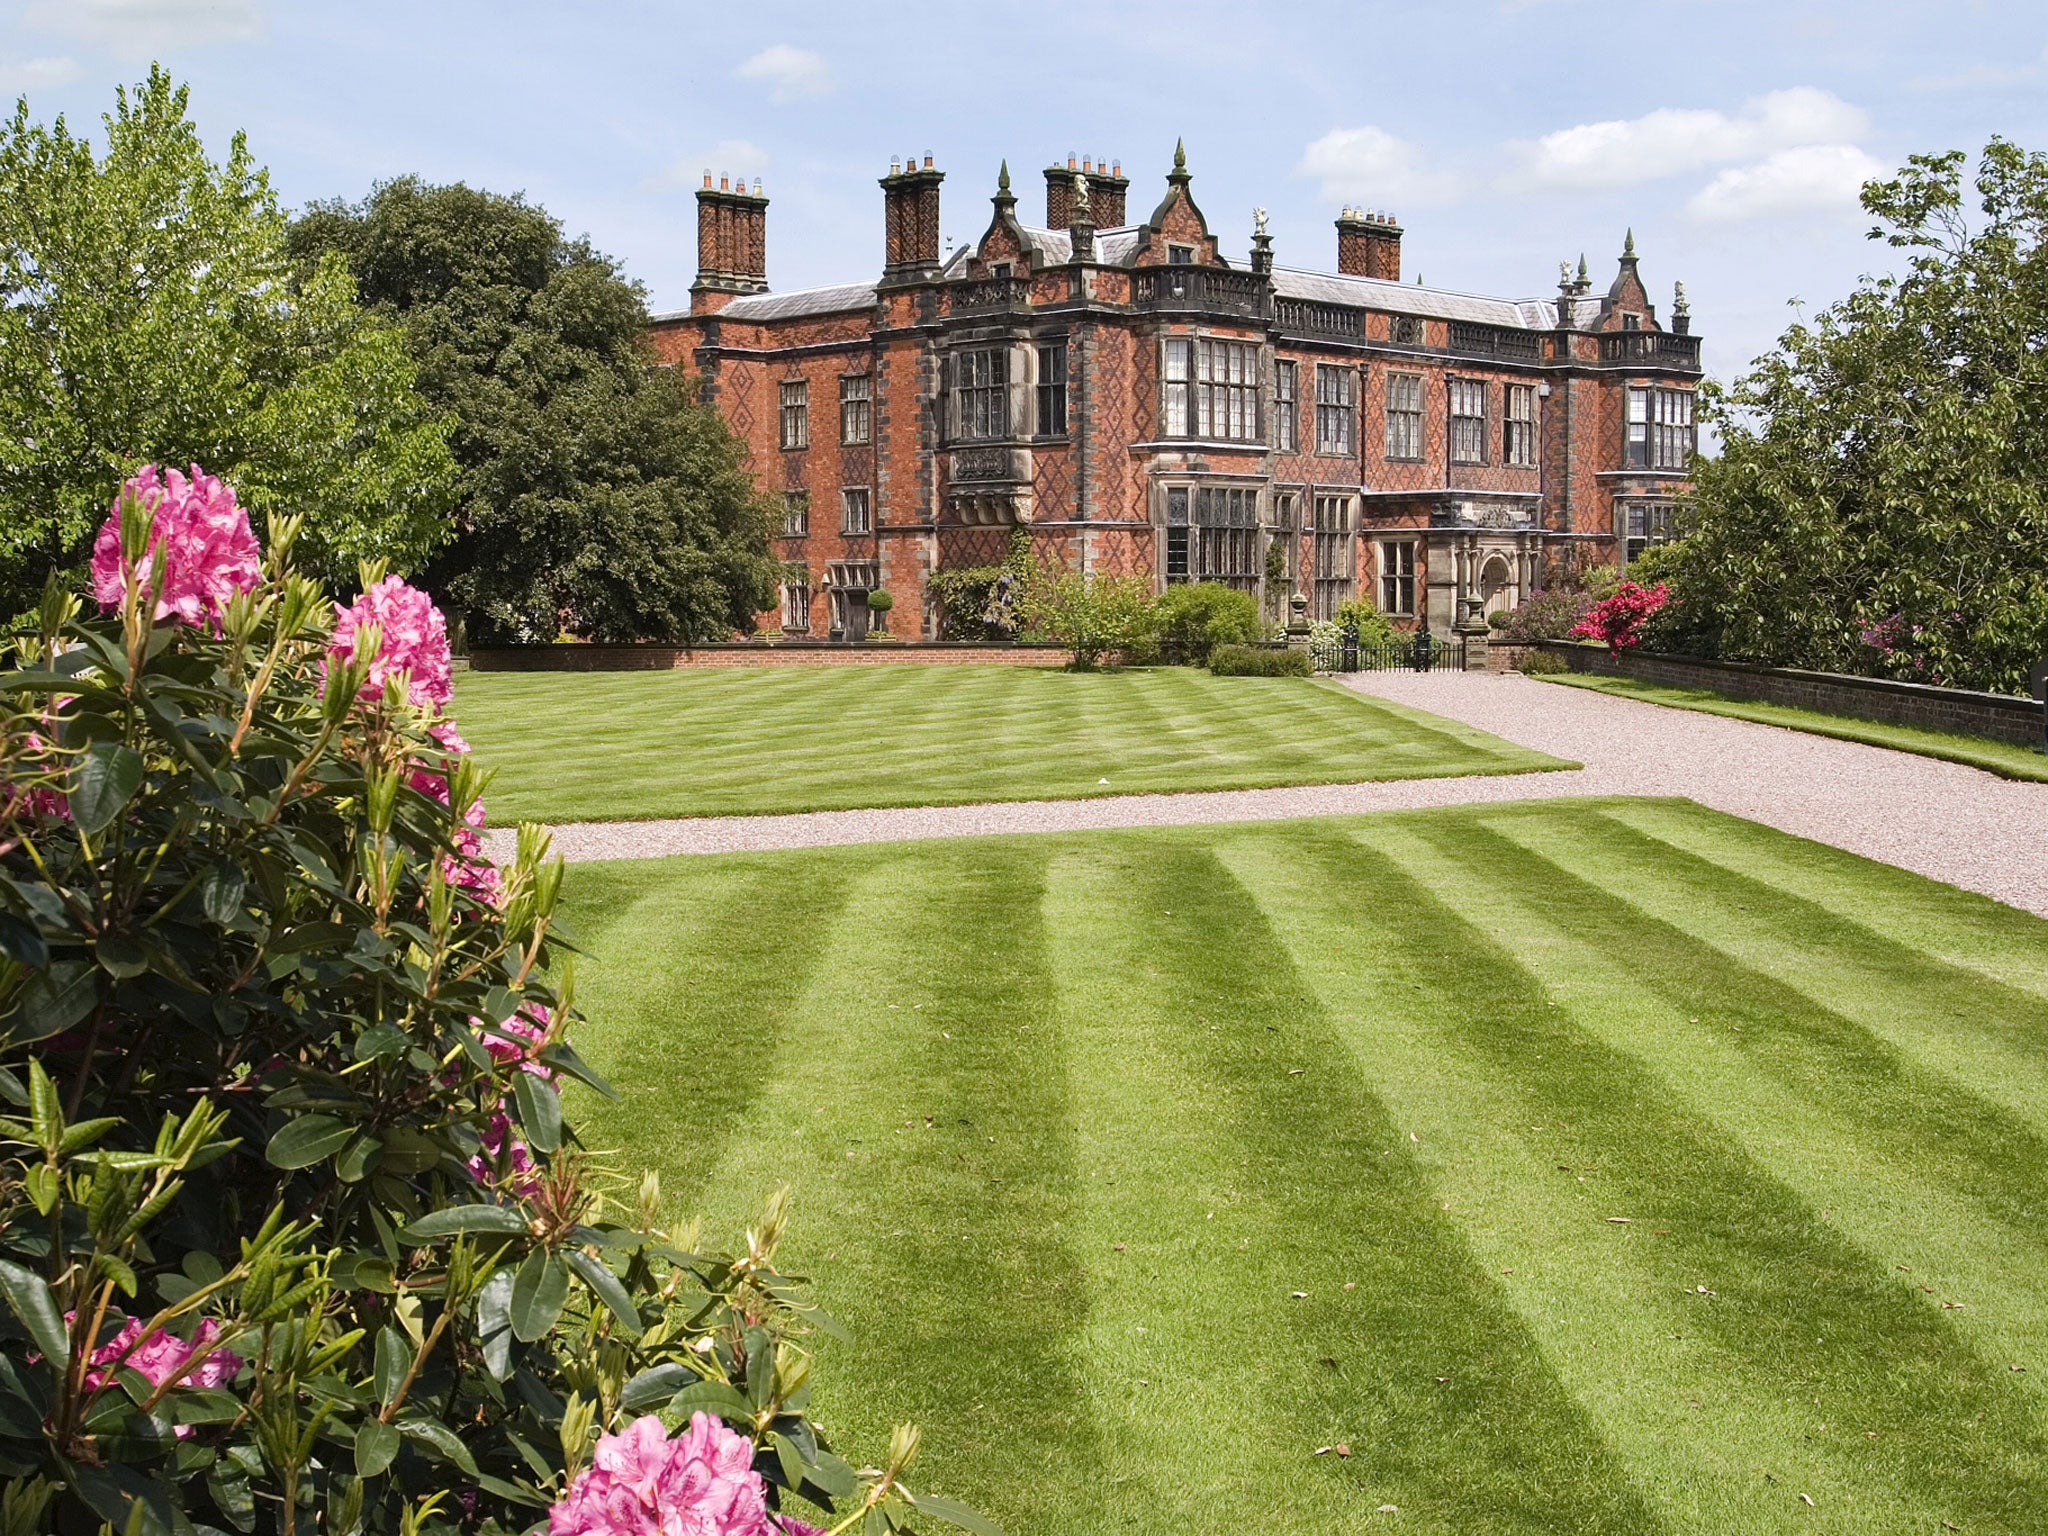 Disney will begin filming the fourpart series ‘Evermoor’ at Arley Hall in the Cheshire countryside in the spring